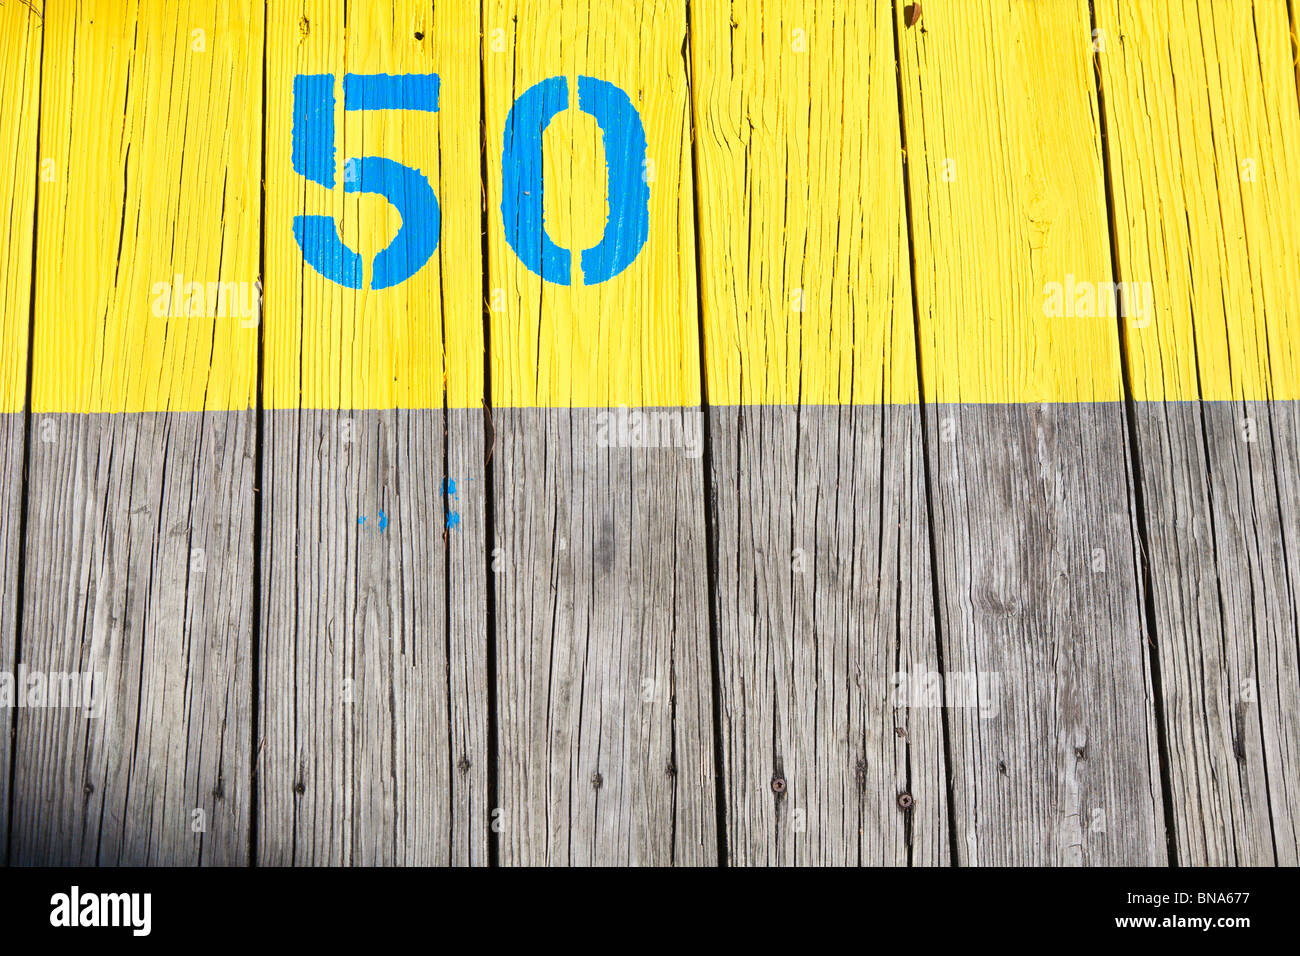 Crystal River, FL - Mar 2009 - The number 50 painted in blue on a bright yellow background on a dock in Crystal River, Florida Stock Photo